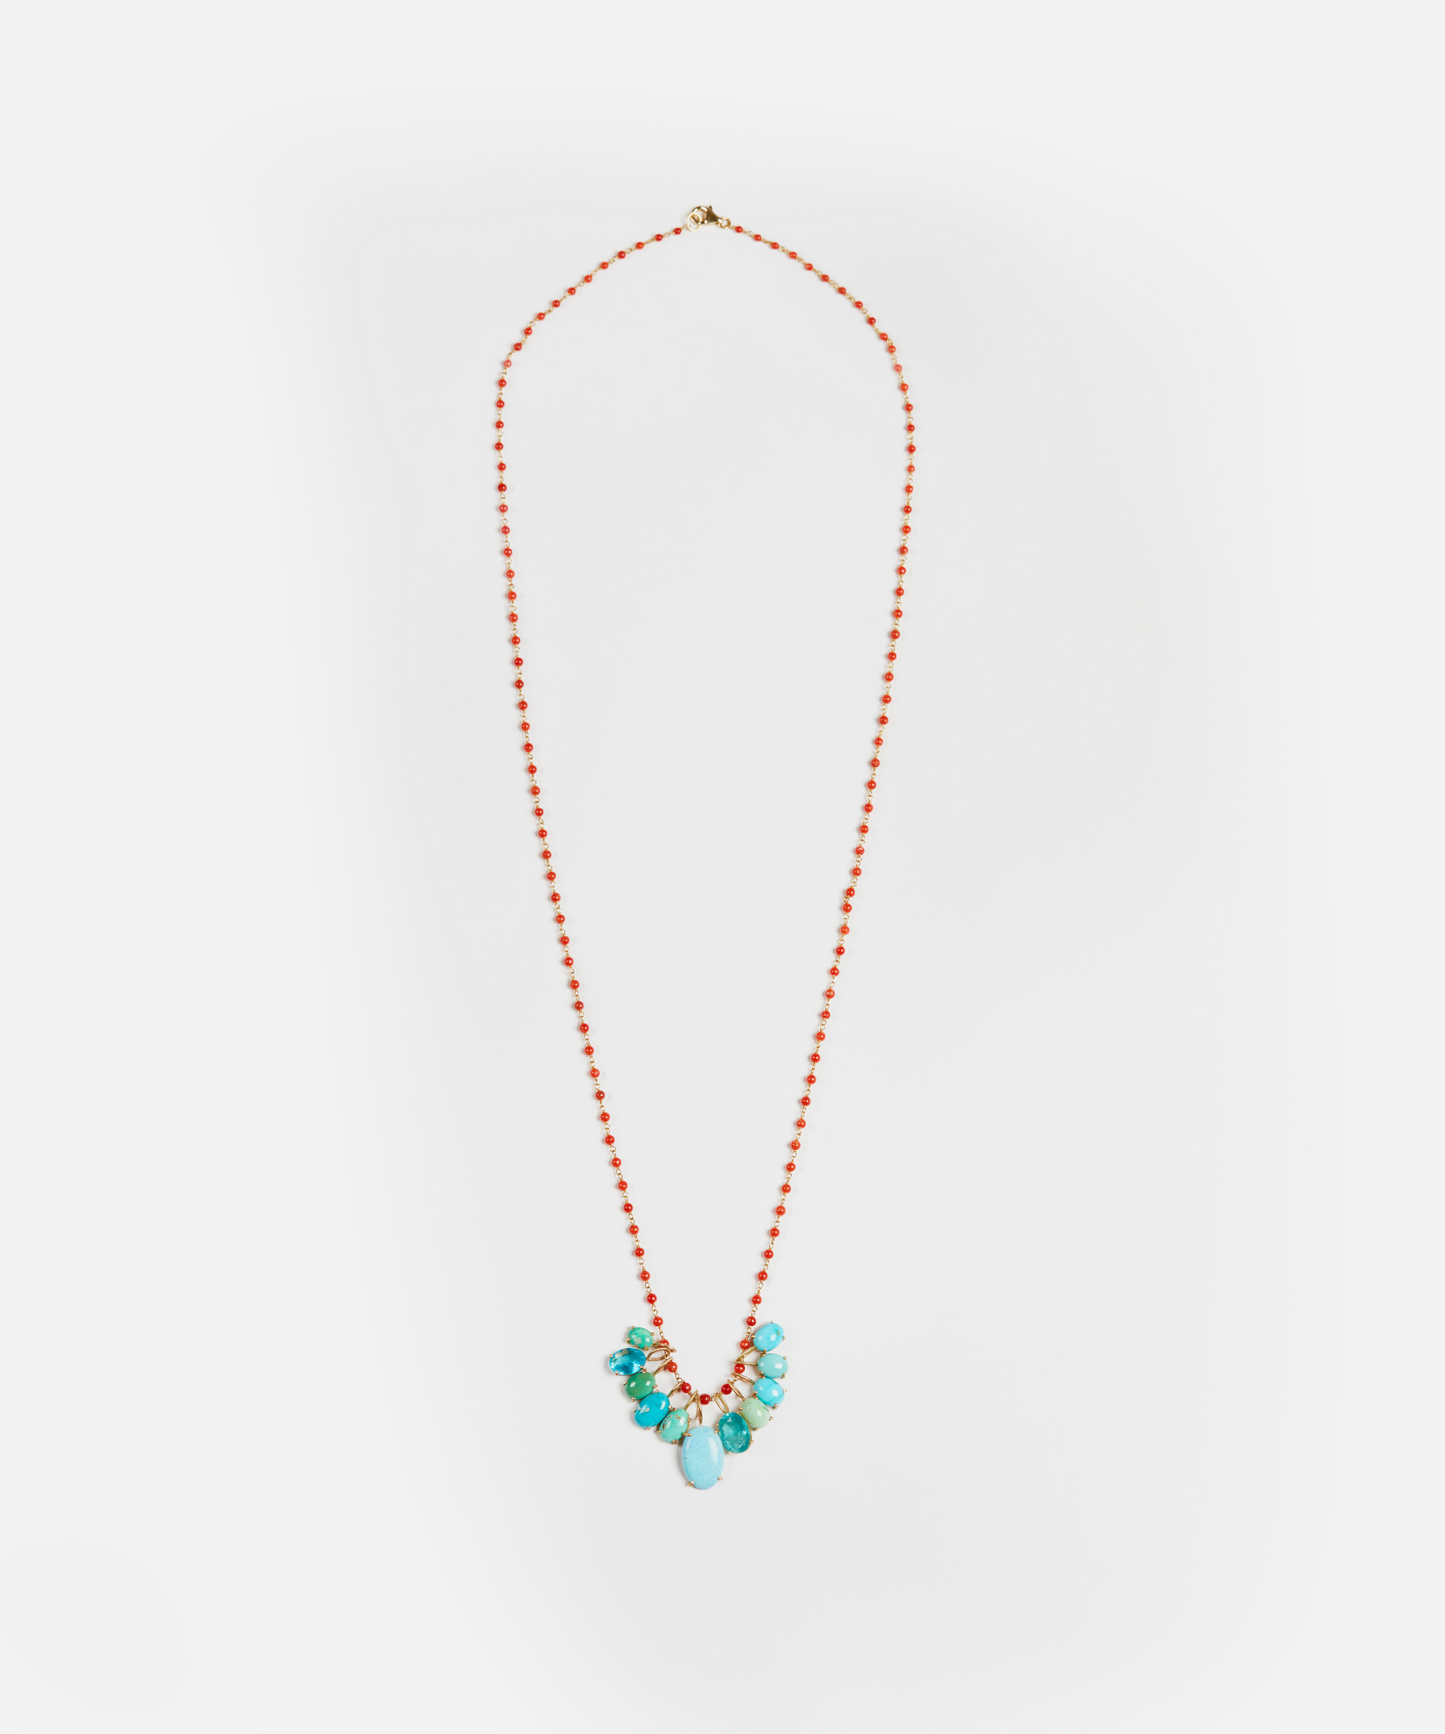 Turquoise and Tourmaline on Coral Chain